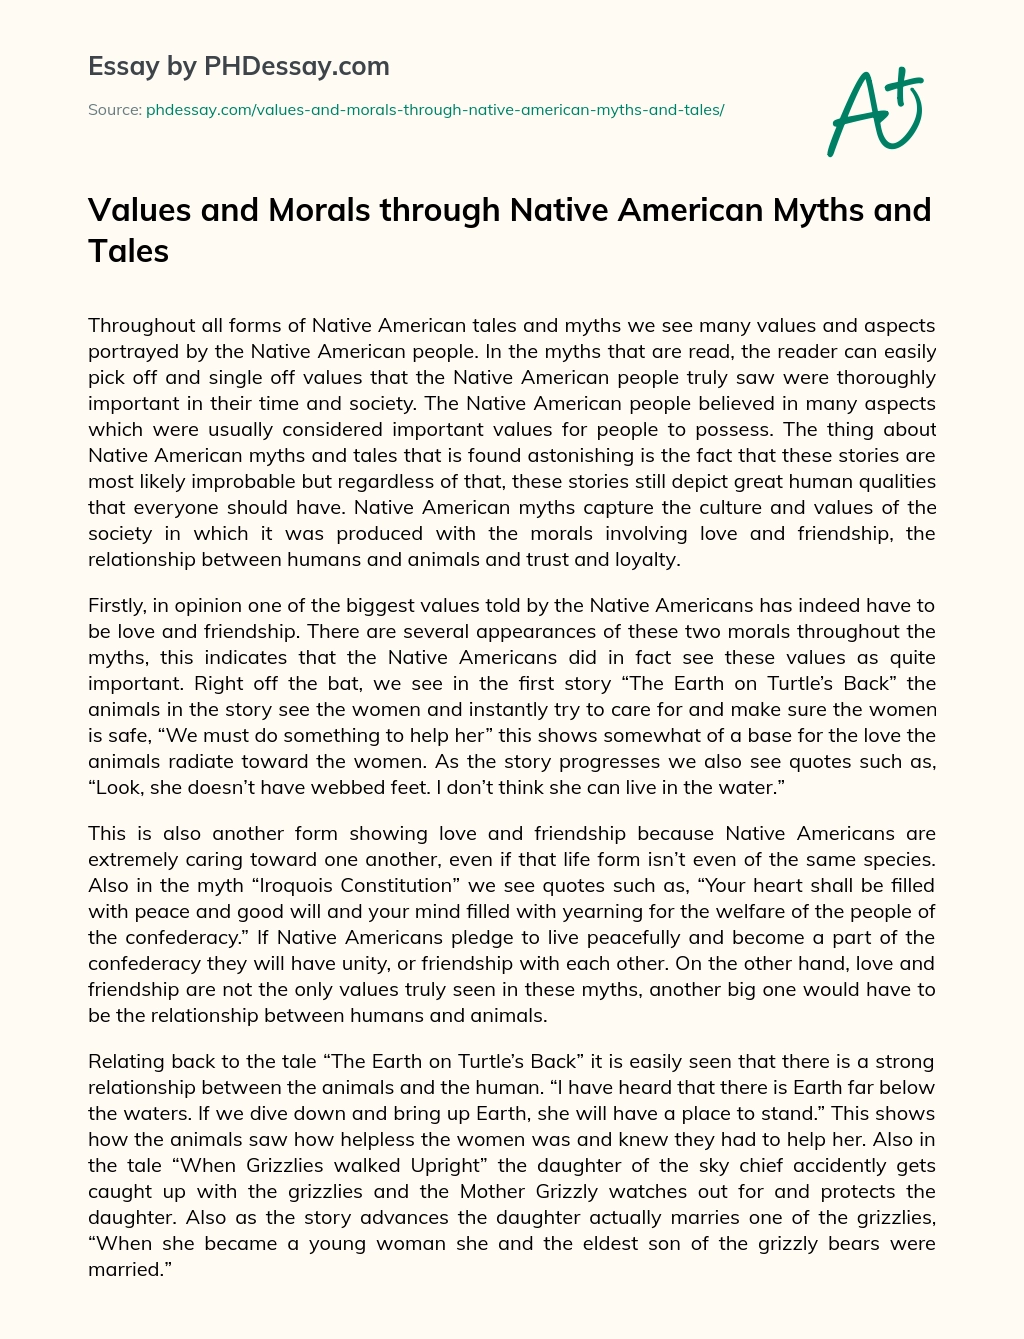 Values and Morals through Native American Myths and Tales essay